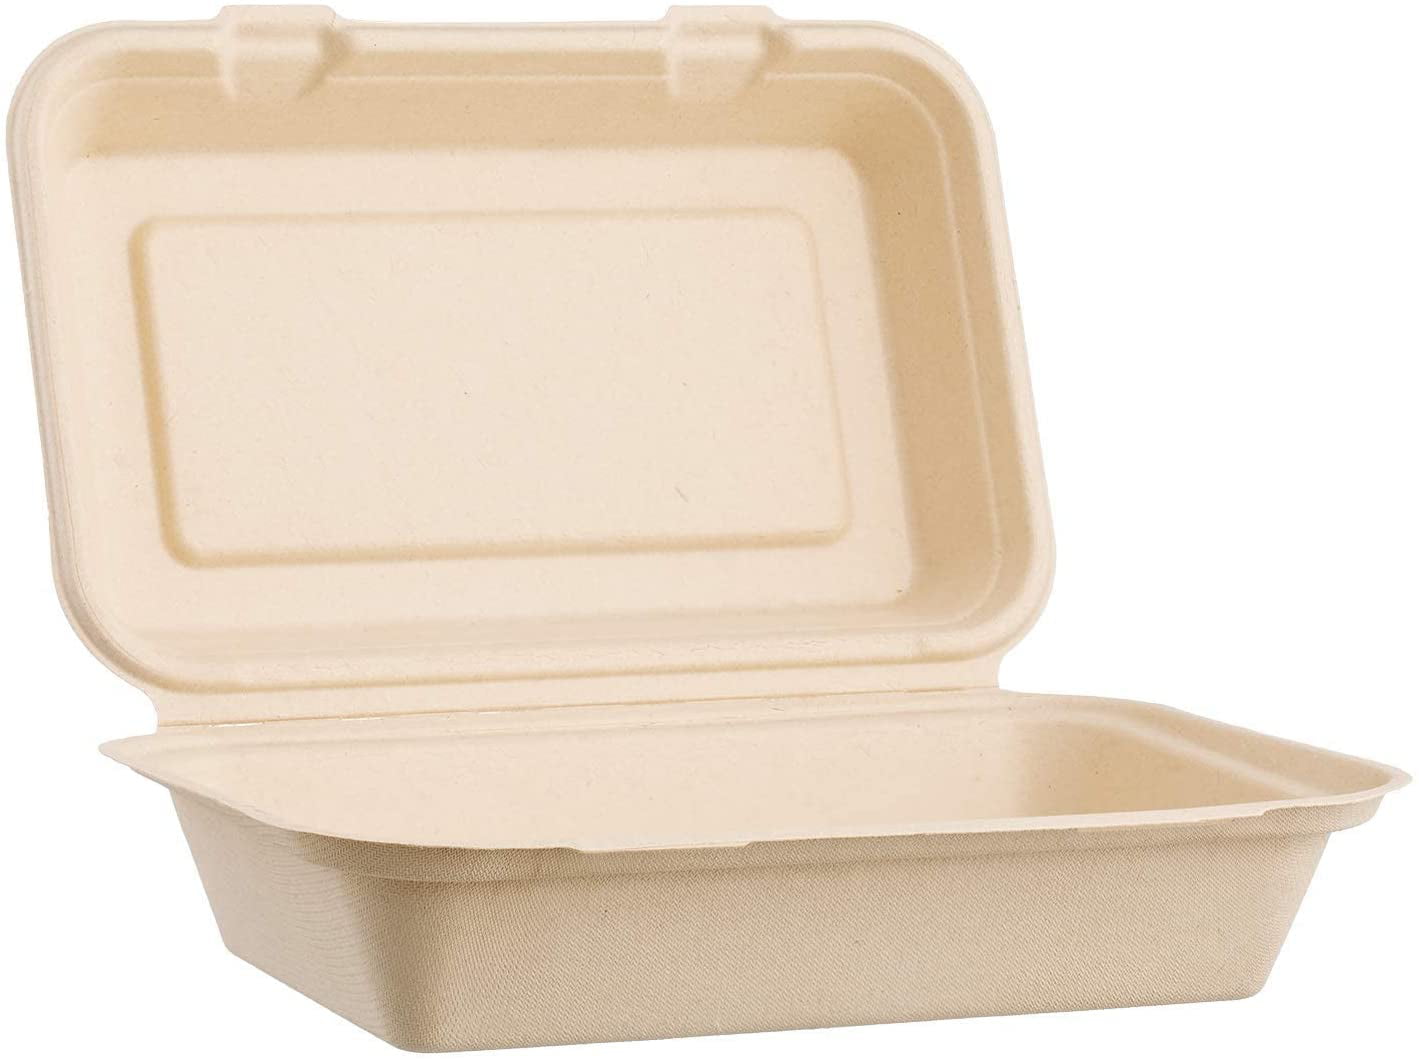 50 COUNT Made from Eco-Friendly Plant Fibers Sugarfiber 9 X 6 White Compostable Square Hinged Container Single Compartment Clamshell Takeout Box 